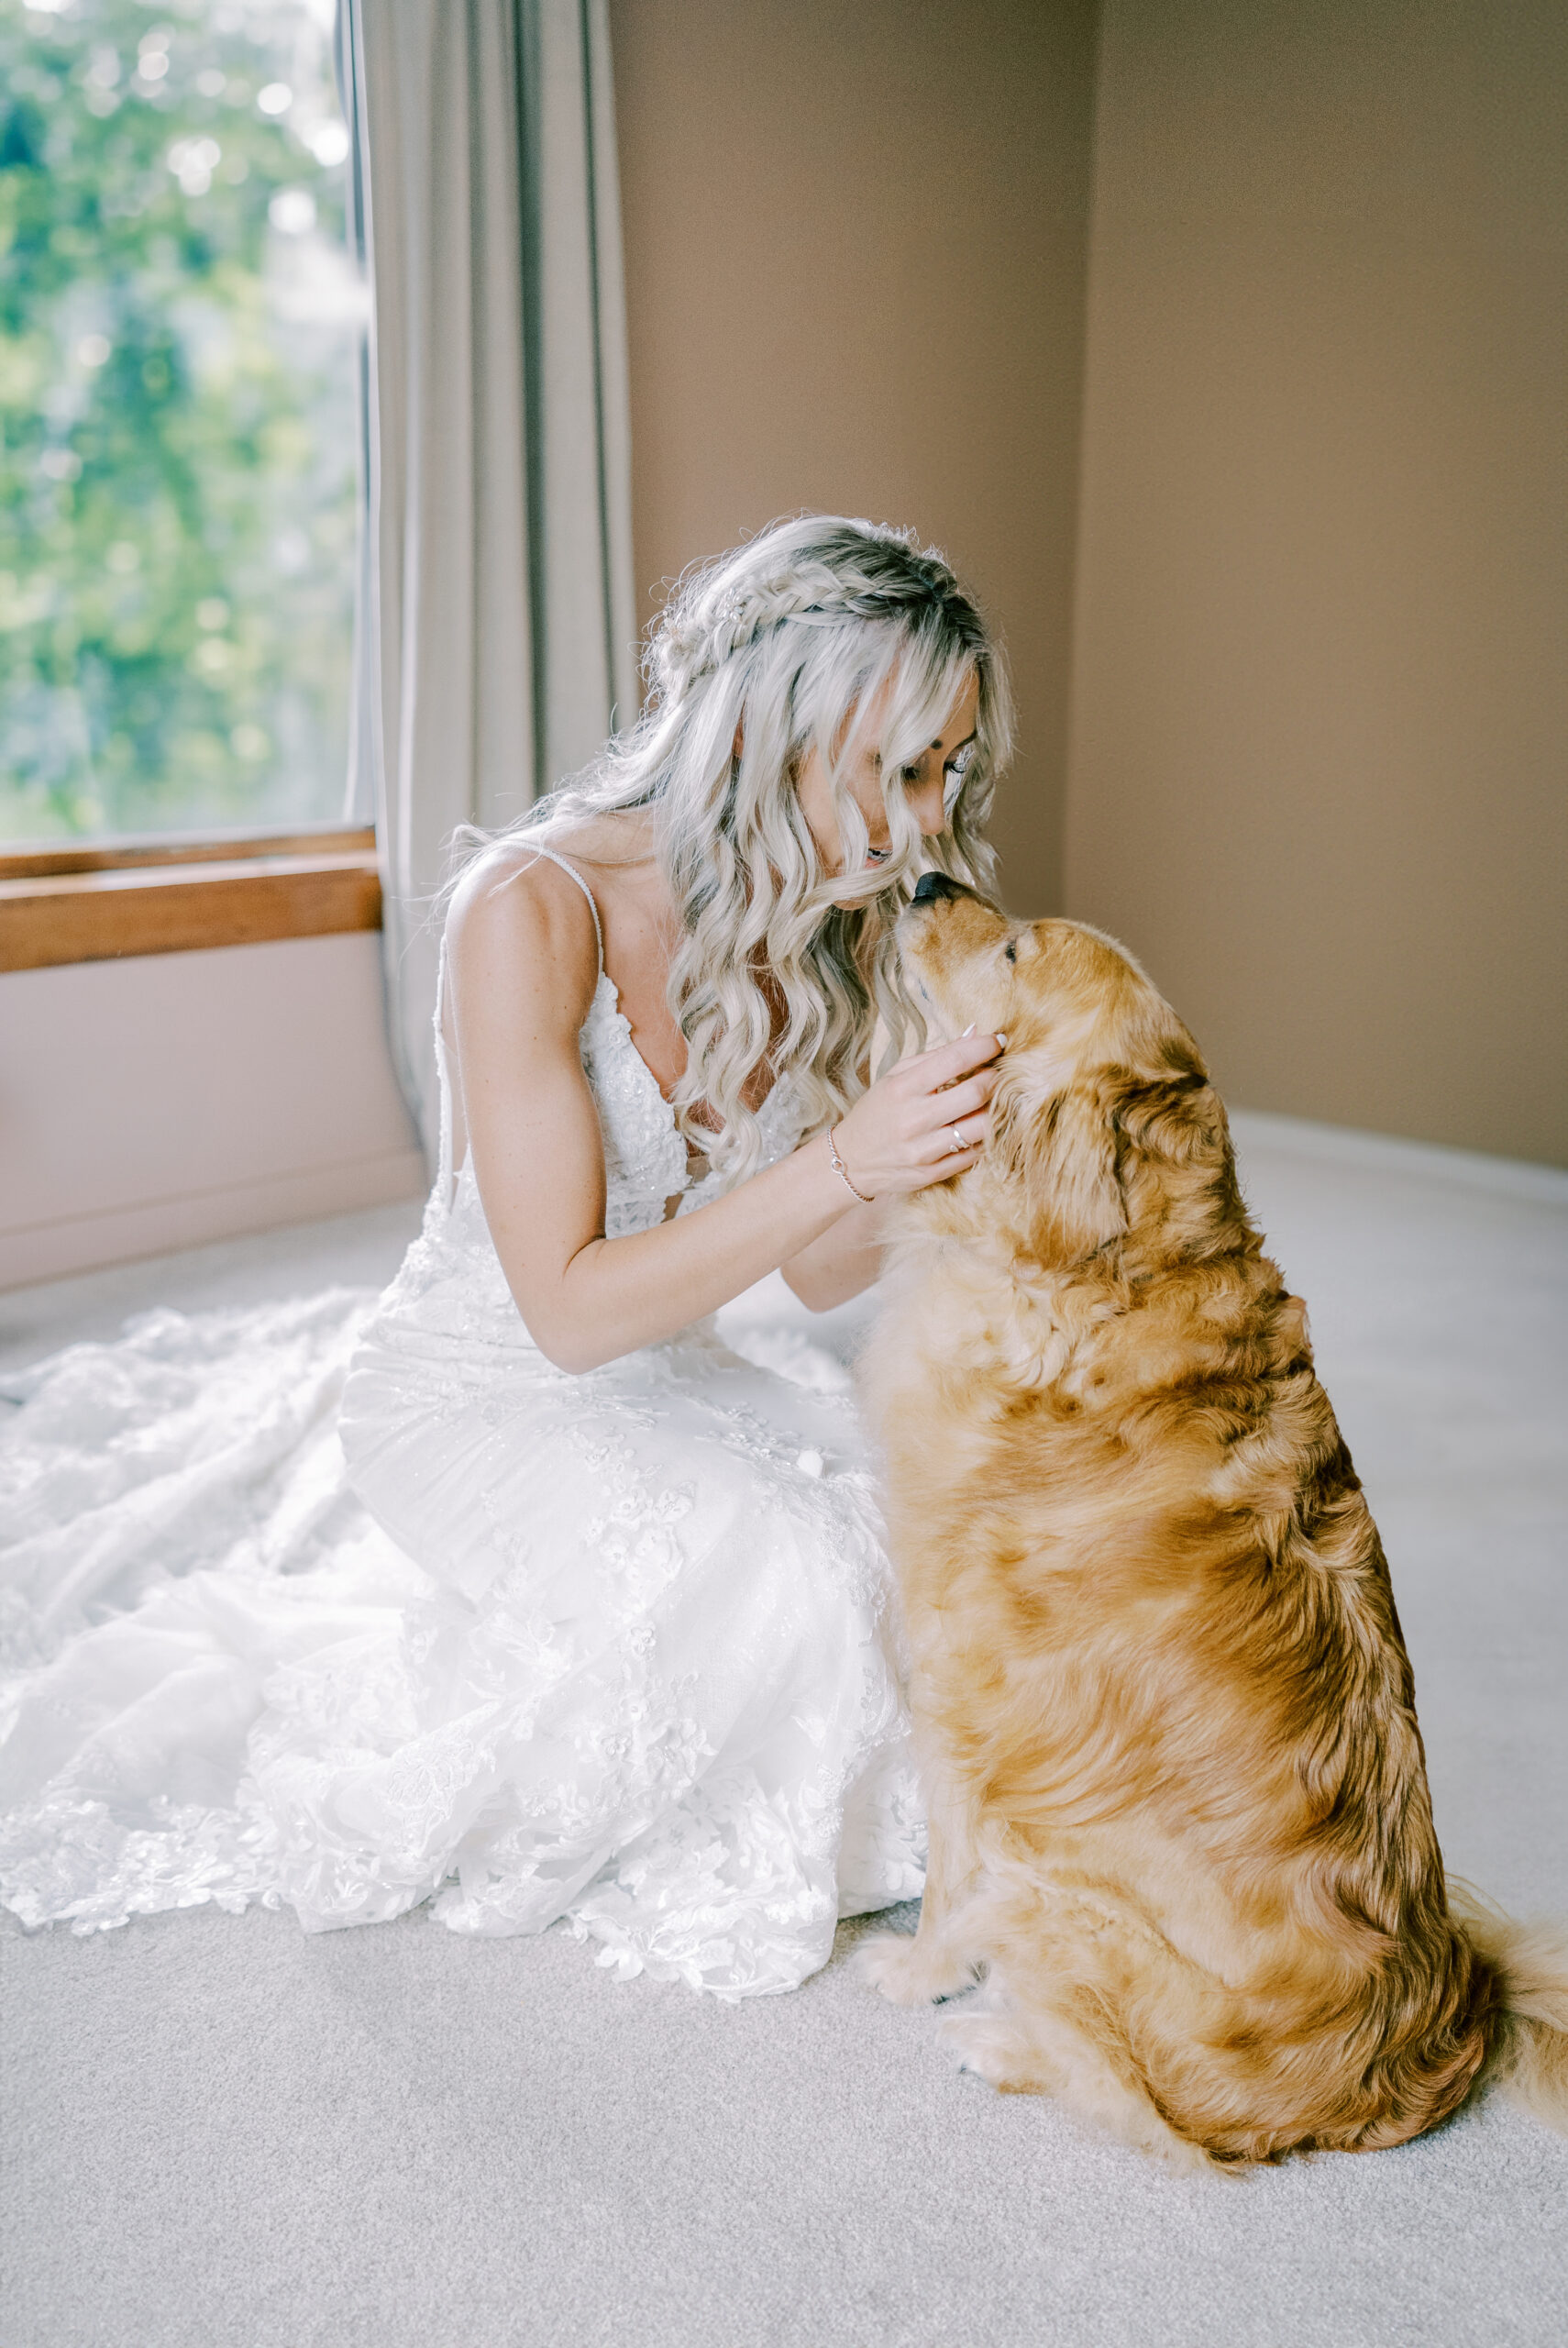 Bride and her dog during getting ready time at her wedding.